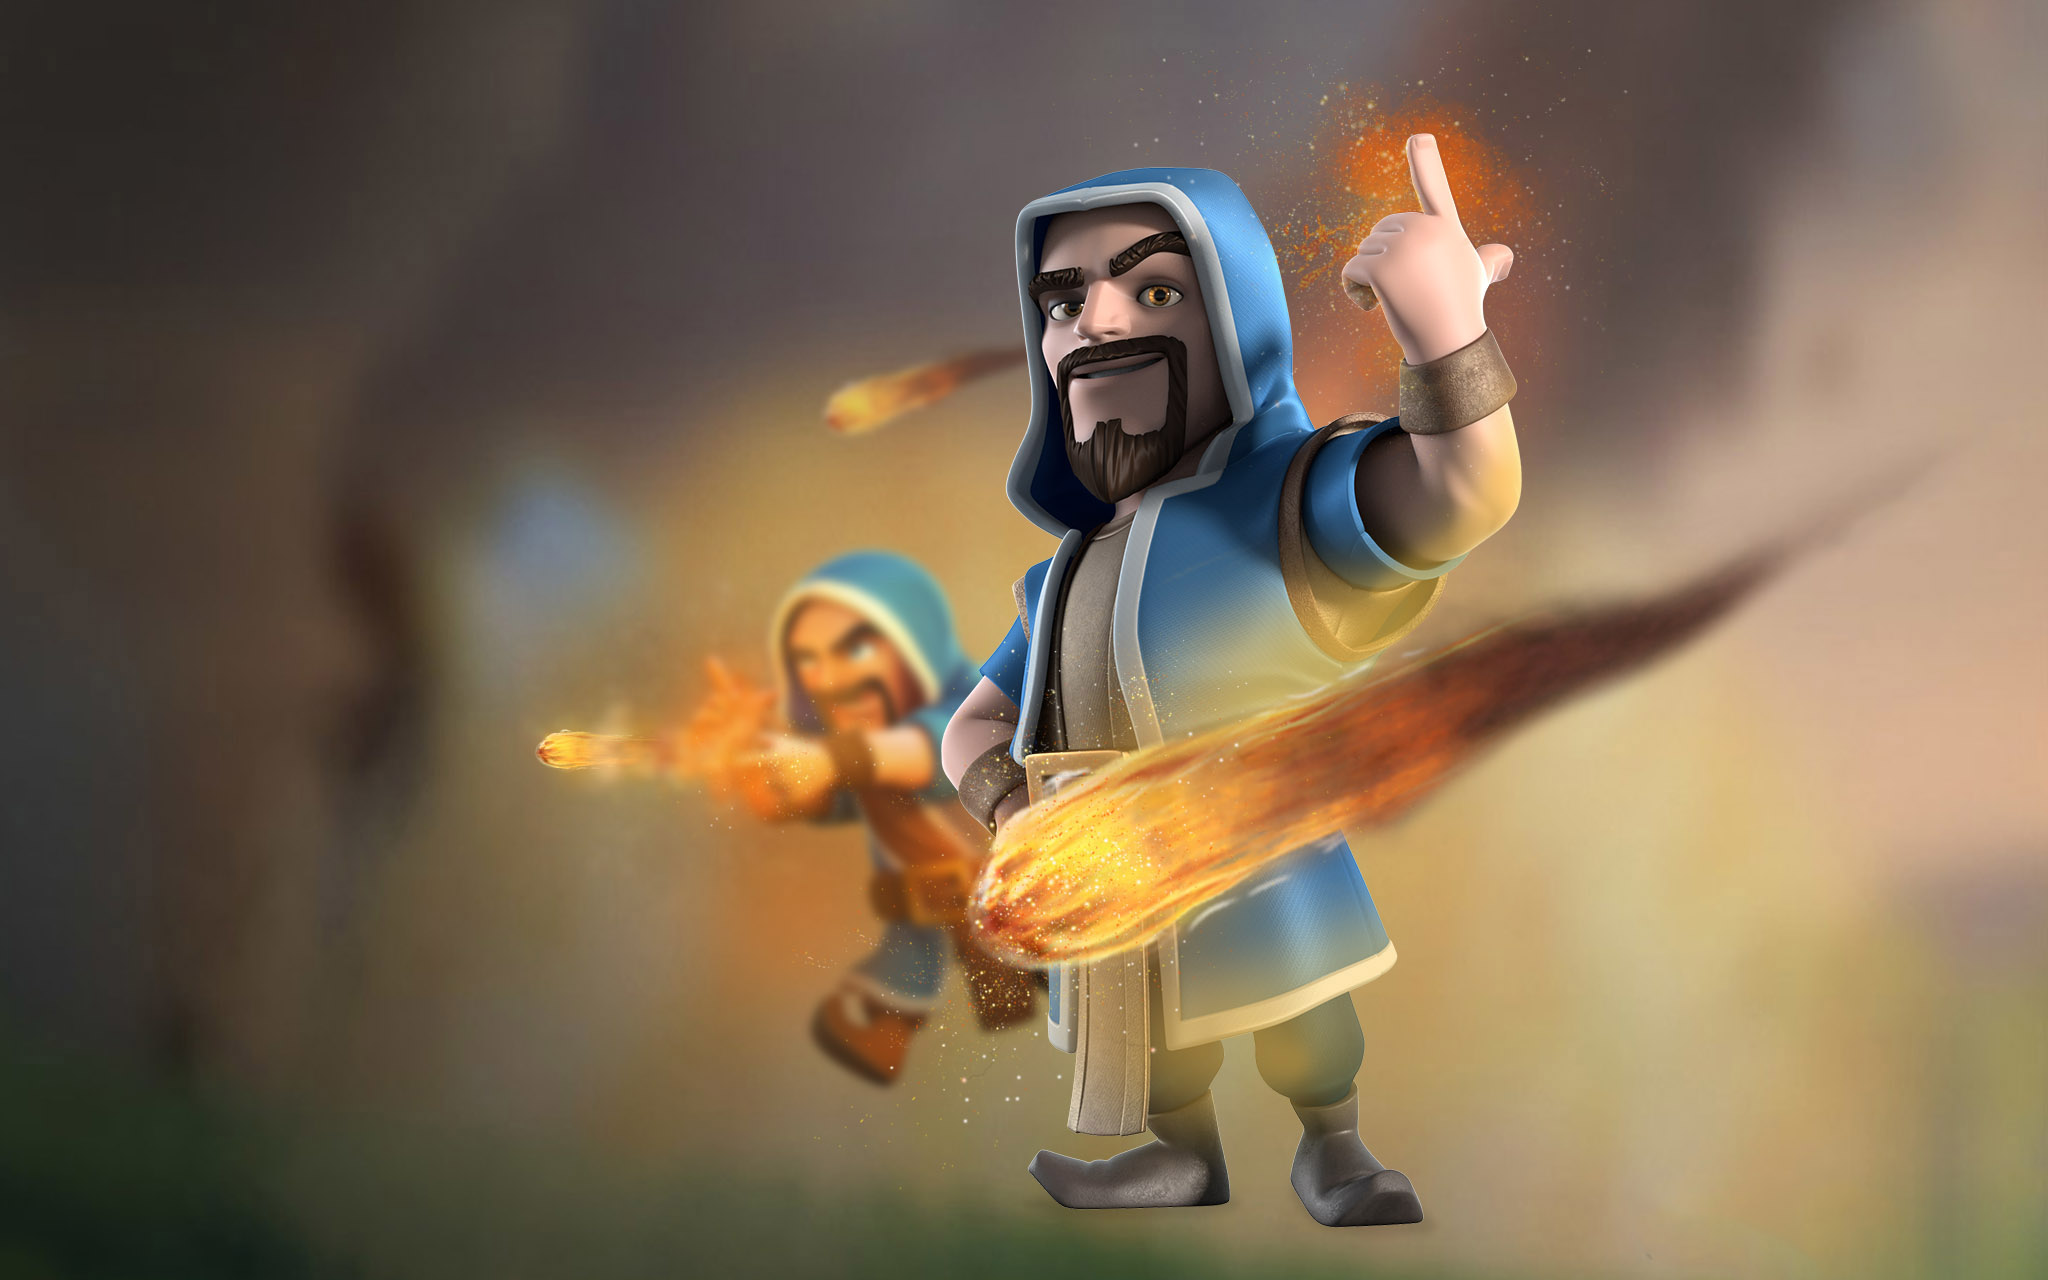 clash of clans wallpaper download,animation,action figure,photography,games